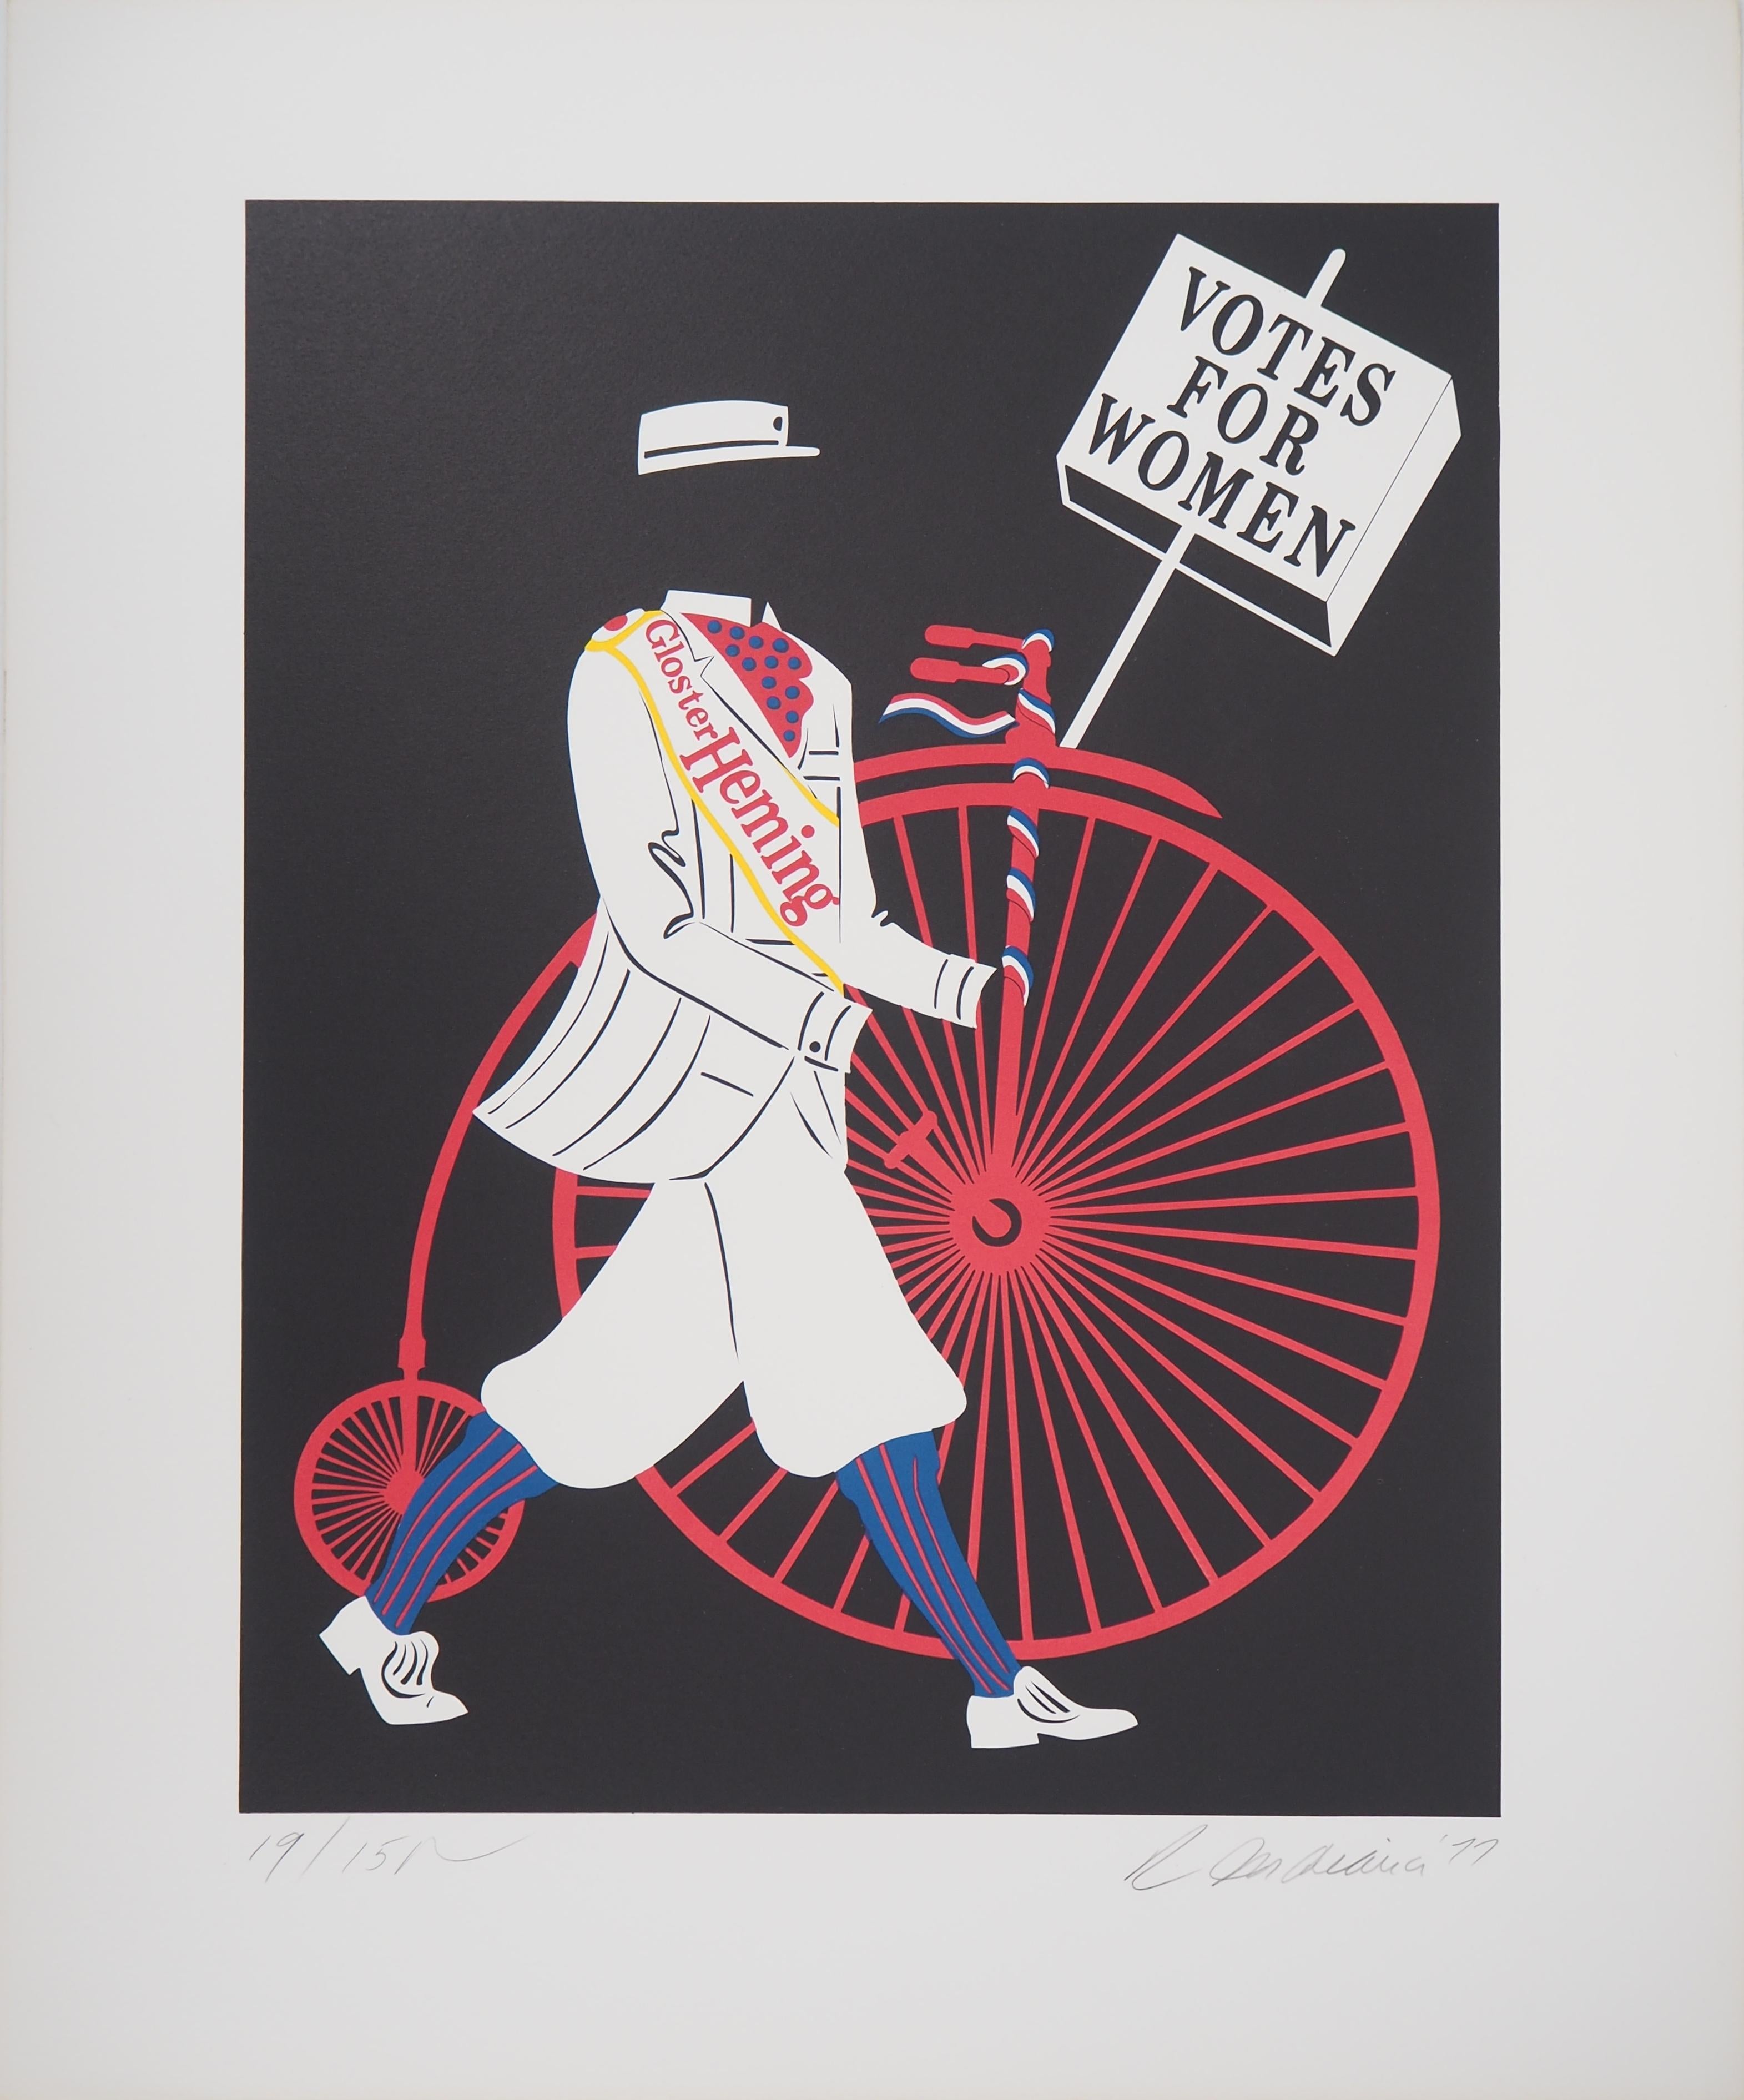 Robert Indiana Figurative Print - Votes for Women - Original lithograph, Handsigned and numbered / 150